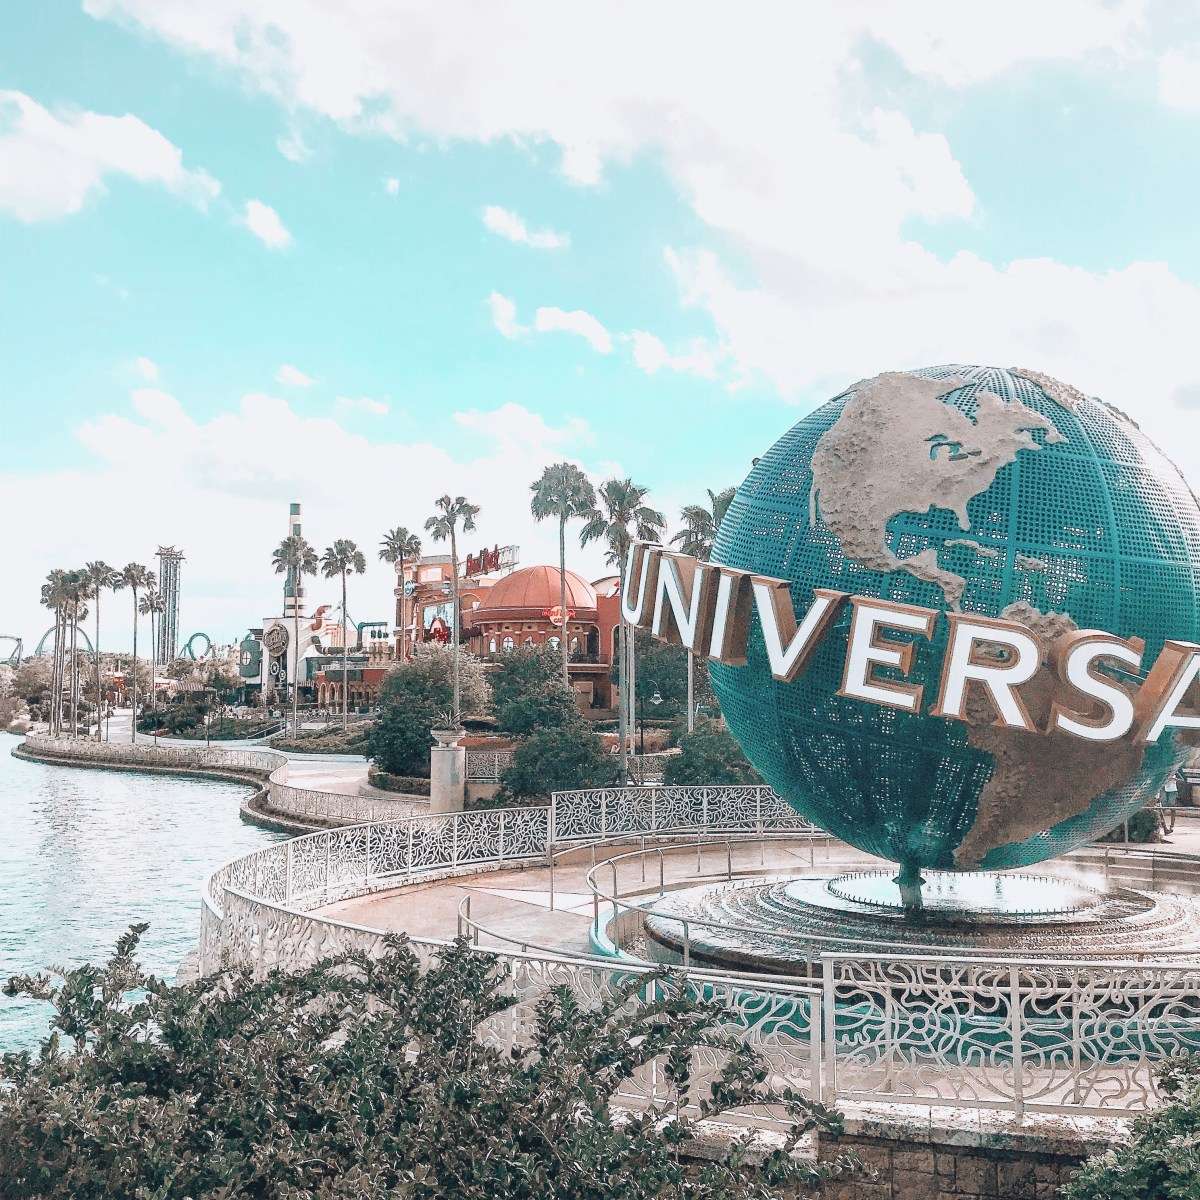 10 TIPS FOR THE BEST UNIVERSAL STUDIOS VACATION â 365 Days of Summer